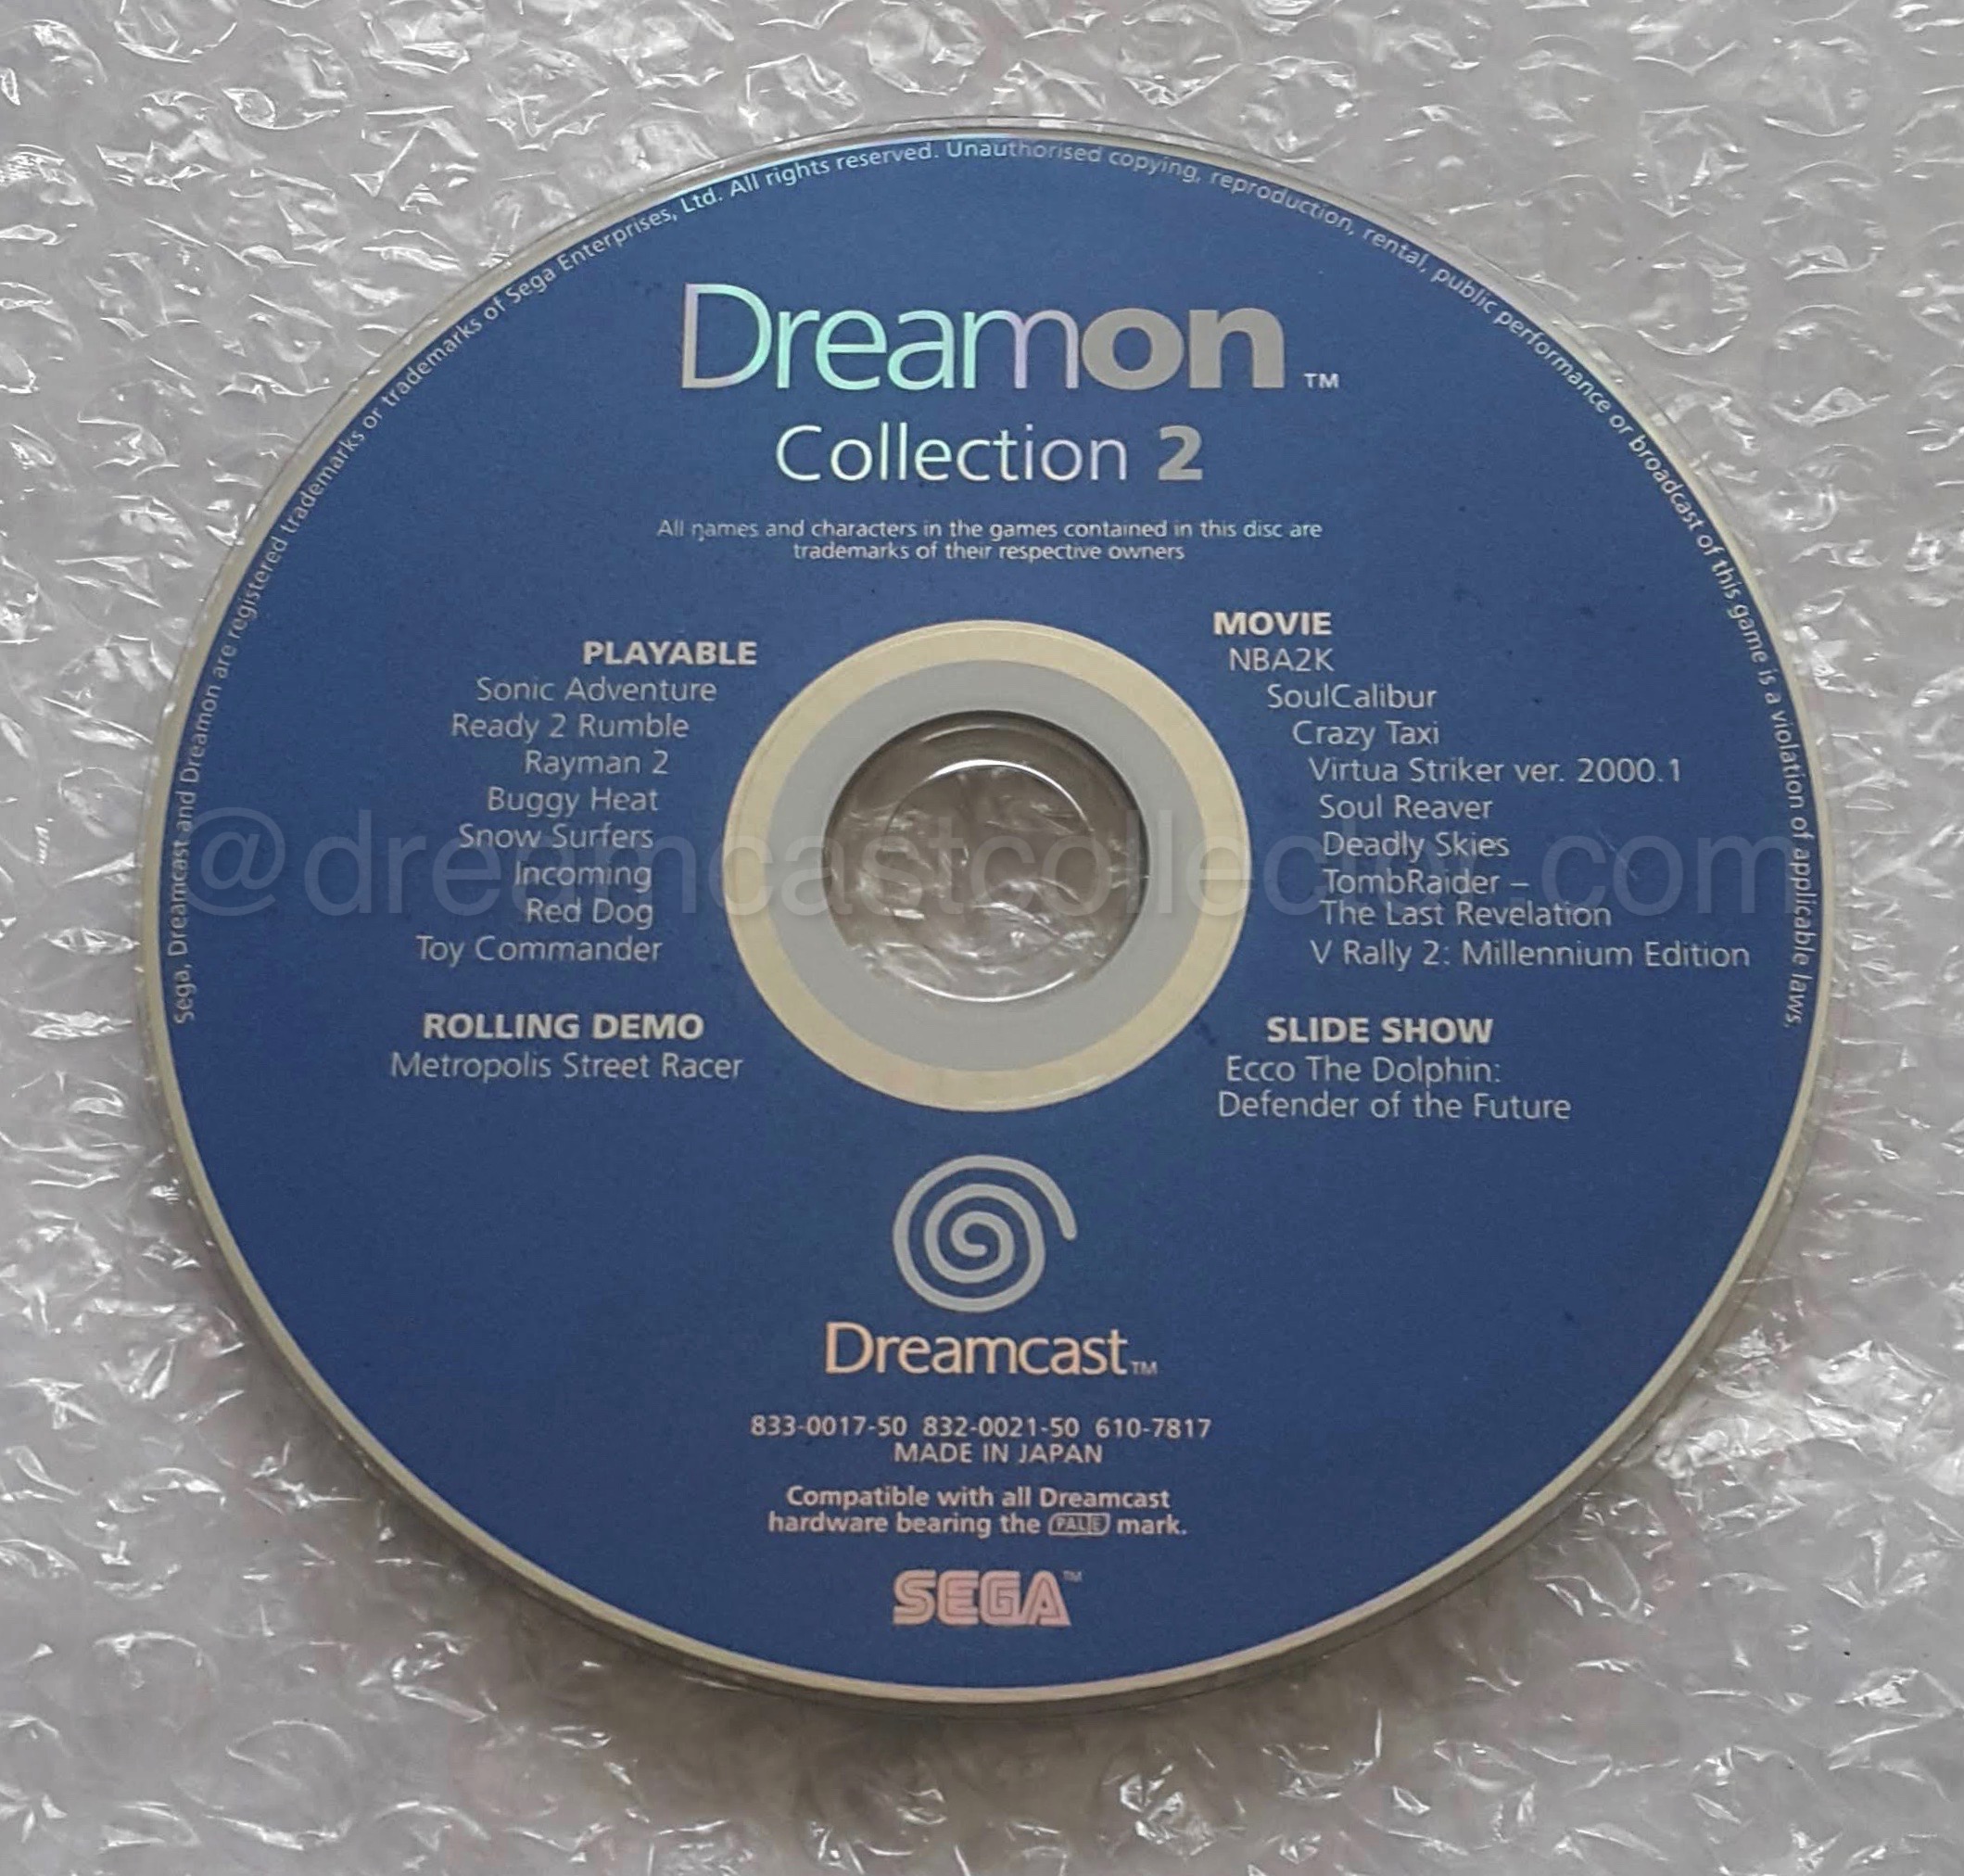 It seems likely, that DreamOn Collection 2 was, manufactured in Japan for the same reason as its predecessor. I also have no doubt that it was, replicated in significant quantities. Unusually for a PAL disc, it displays three product codes on the disc label. The first two are European designations of, 833-0017-50 & 832-0021-50 that represent a general release. The third and final serial is, as expected a Japanese code of 610-7817.